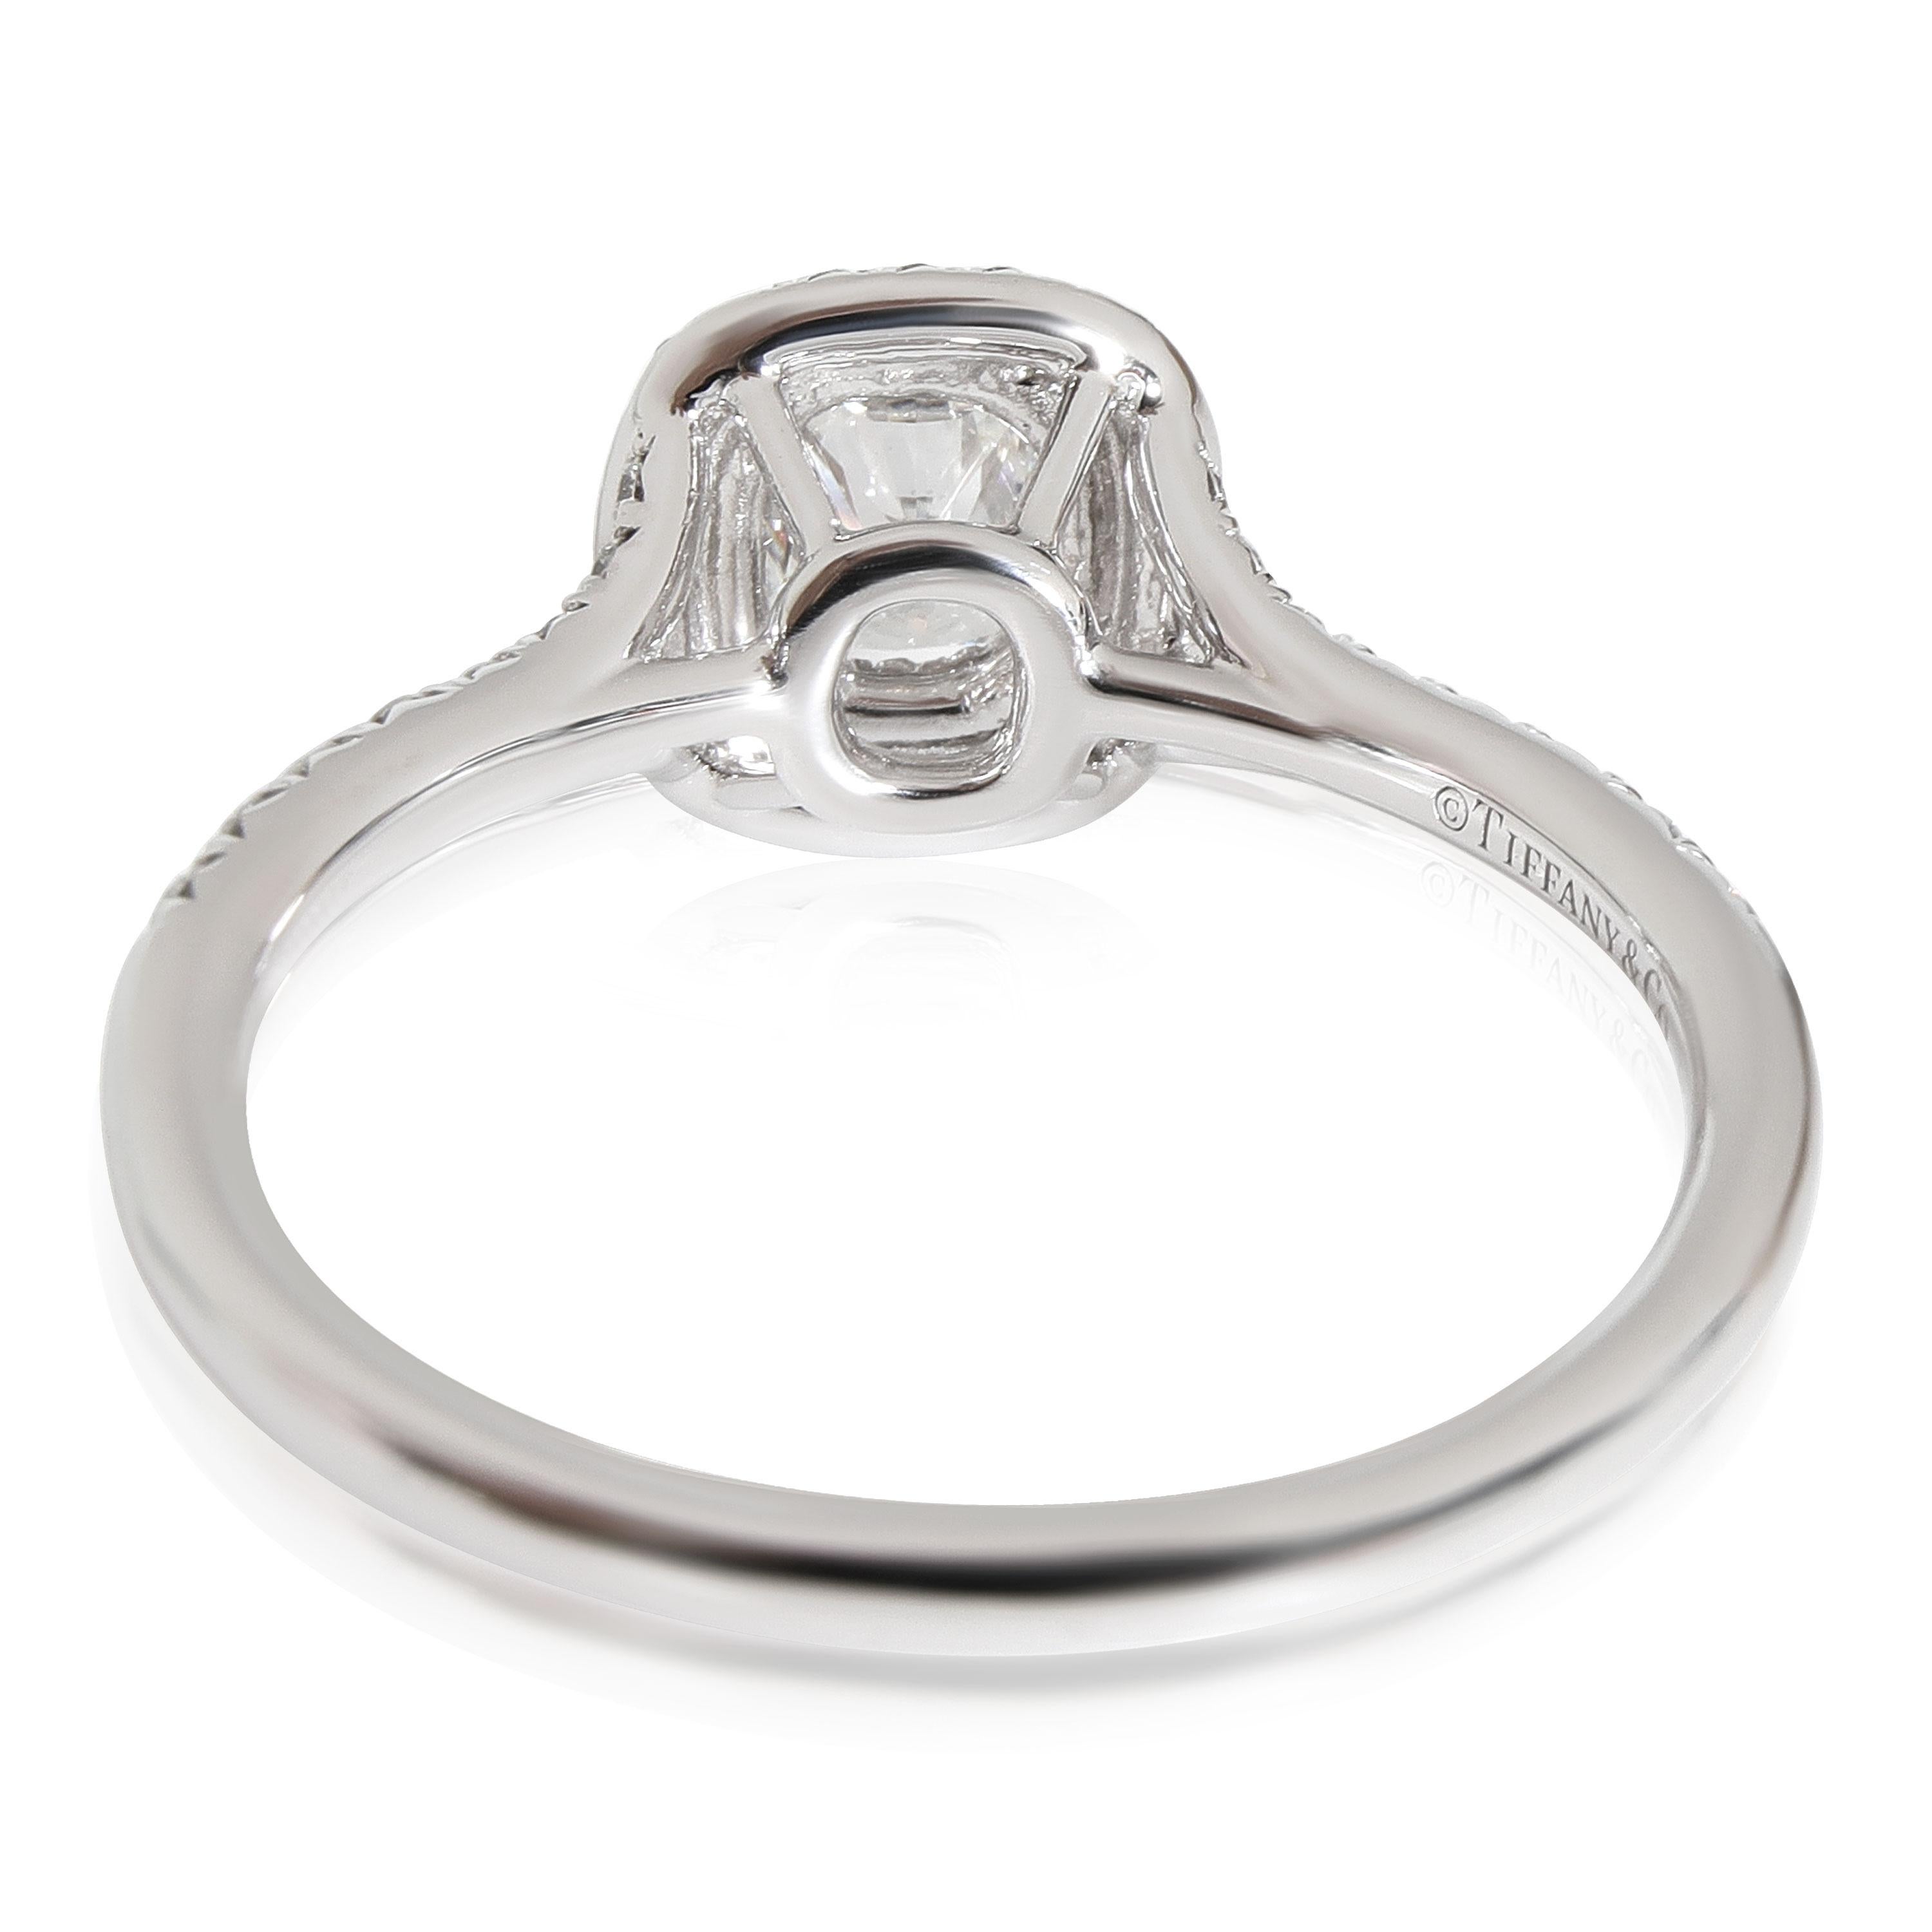 Tiffany & Co. Soleste Diamond Engagement Ring in Platinum F VS1 0.80 ctw

PRIMARY DETAILS
SKU: 115173
Listing Title: Tiffany & Co. Soleste Diamond Engagement Ring in Platinum F VS1 0.80 ctw
Condition Description: Retails for 9350 USD. In excellent